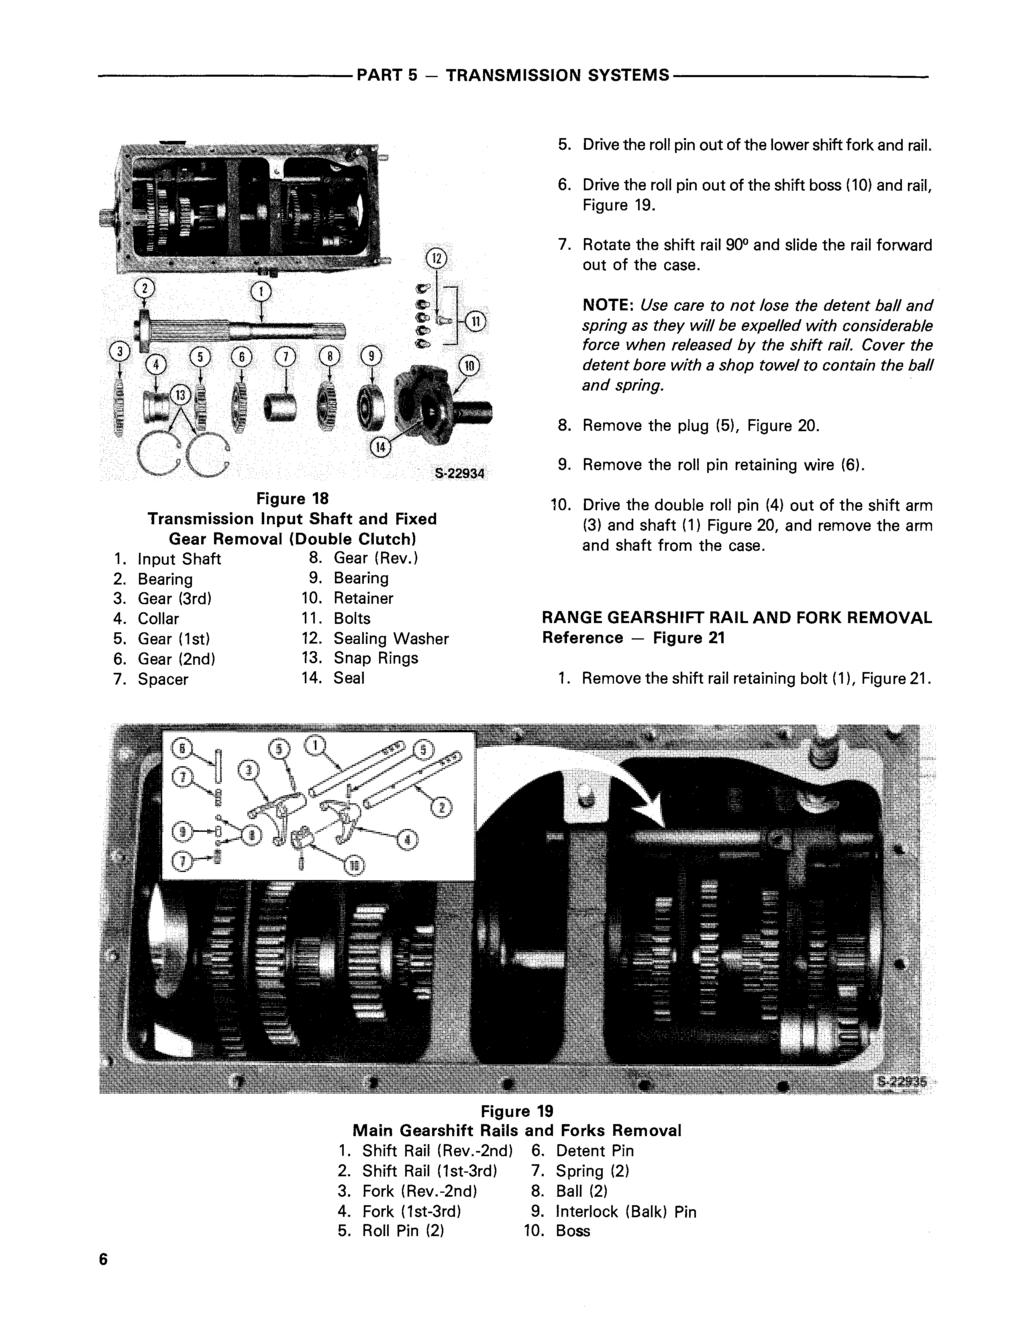 -----------PART 5 - TRANSMISSION SYSTEMS----------- 5. Drive the roll pin out of the lower shift fork and rail. 6. Drive the roll pin out of the shift boss (10) and rail, Figure 19. 7.